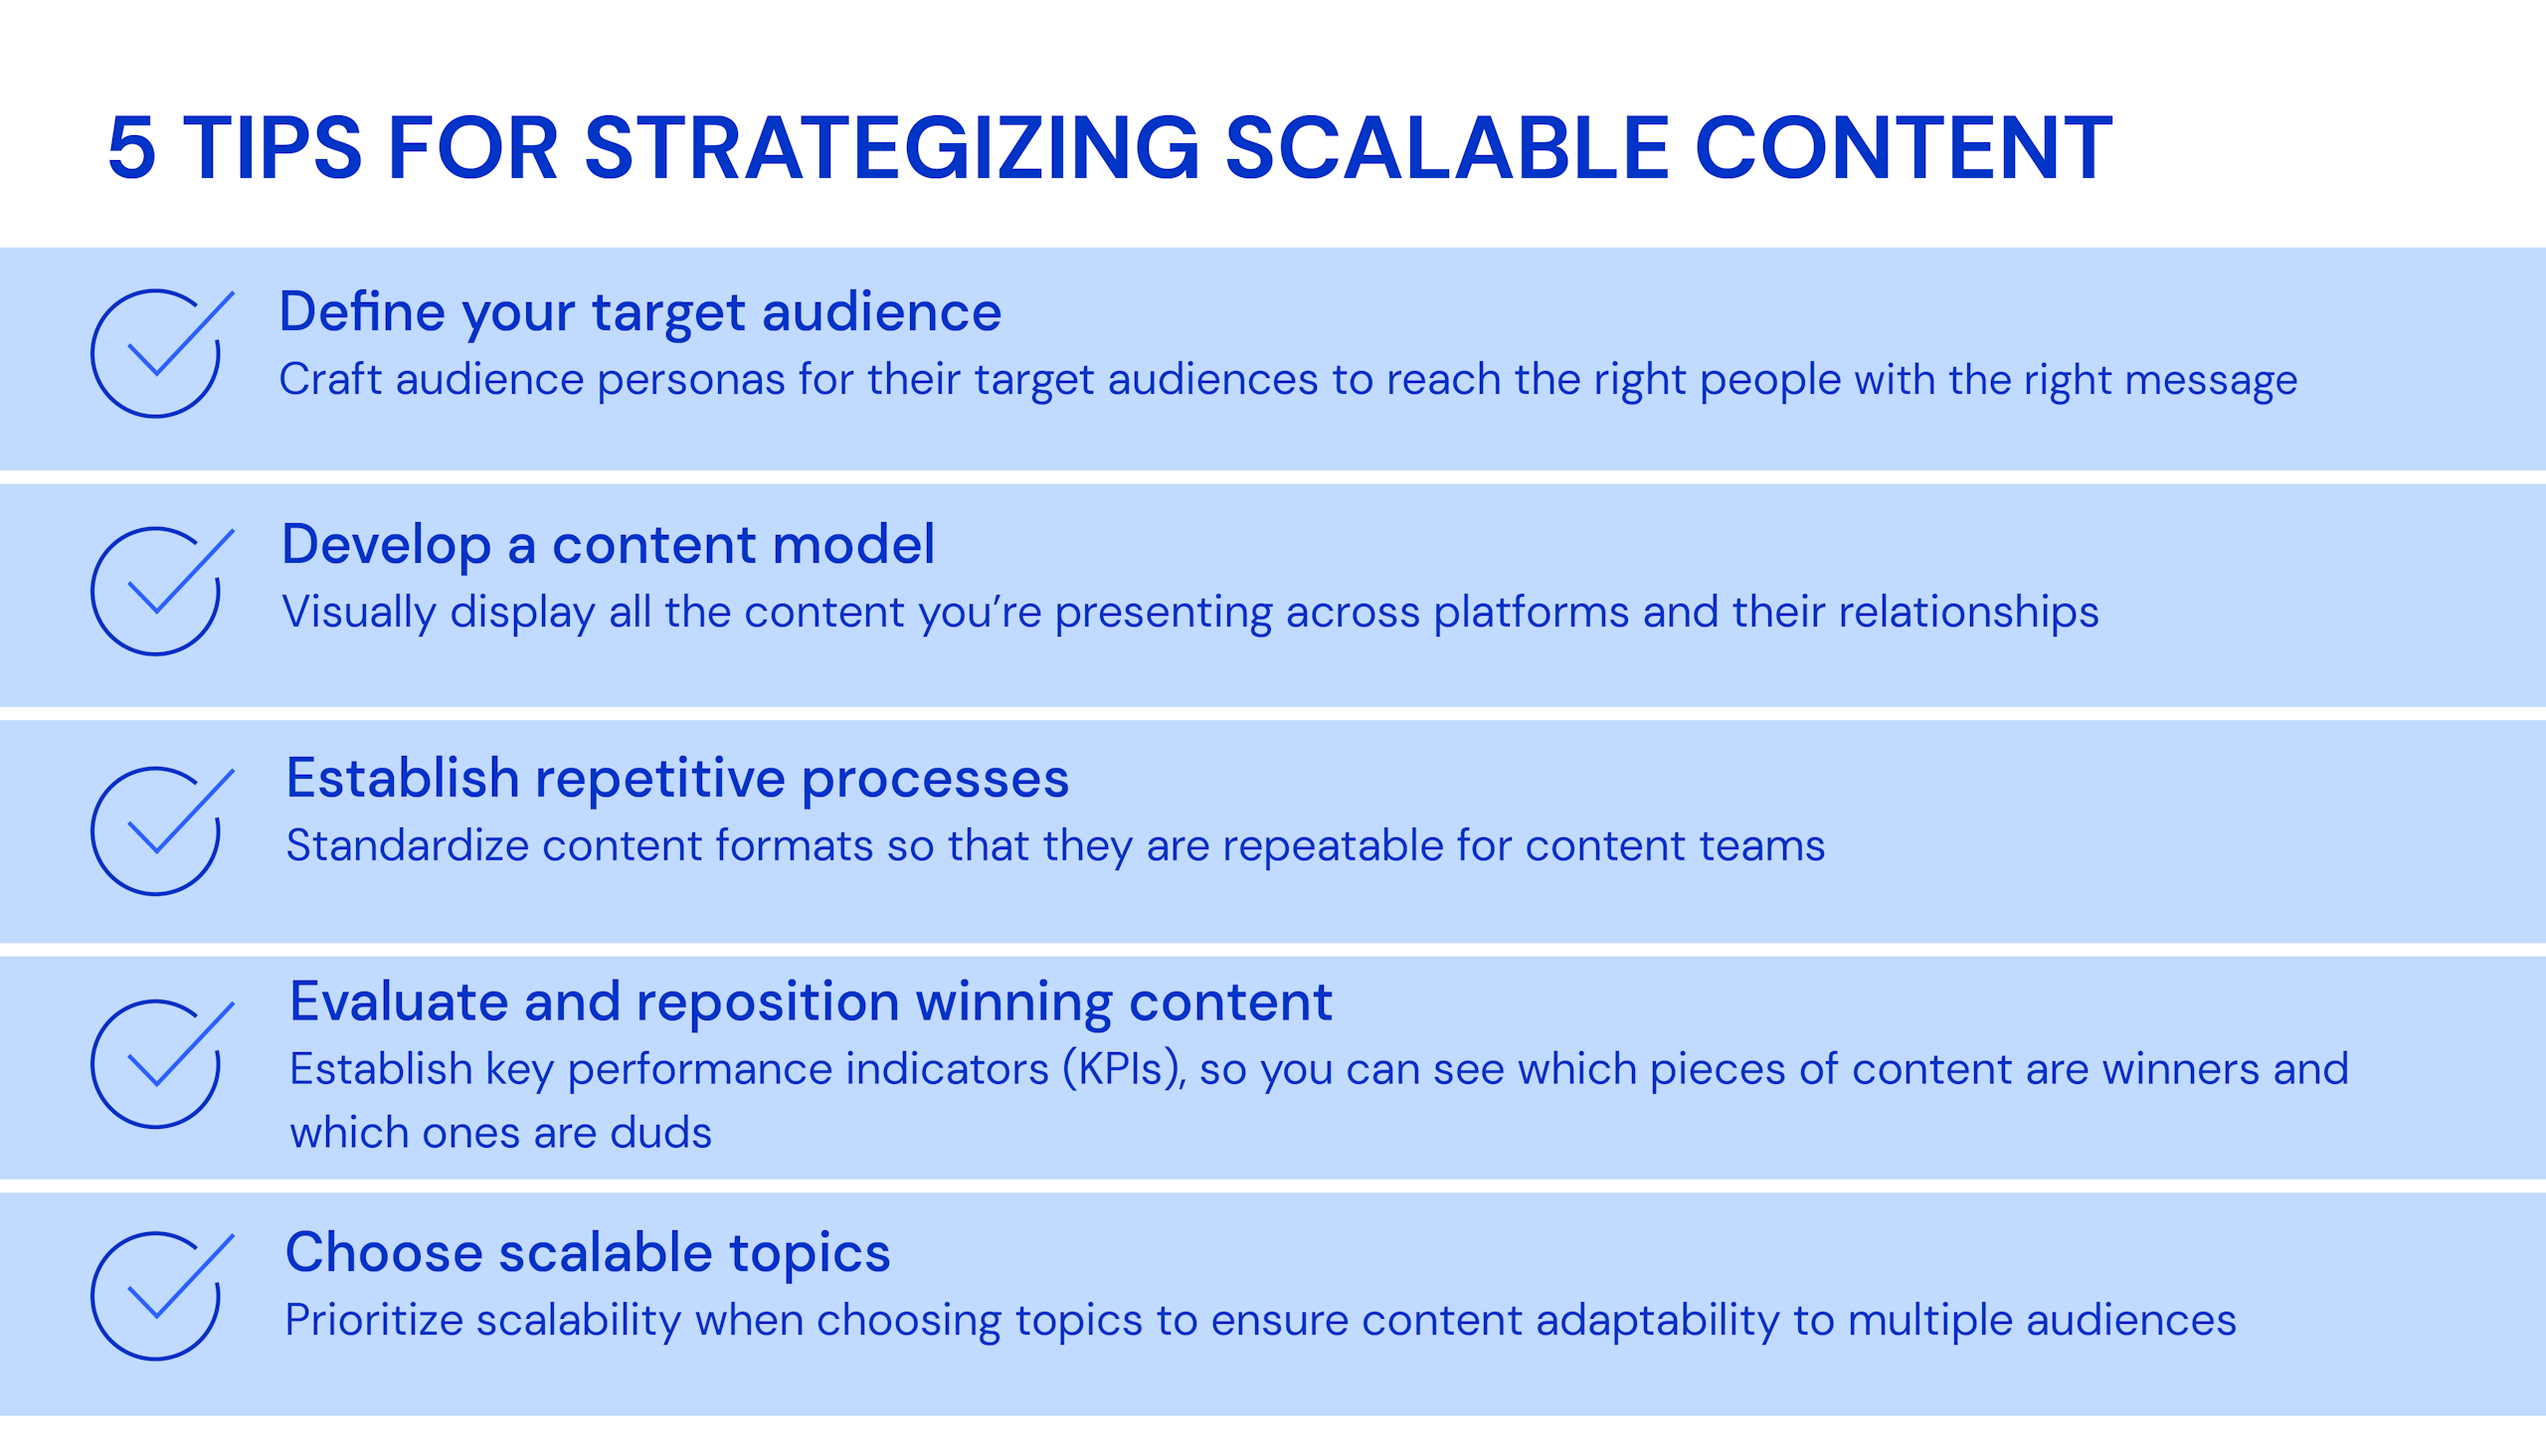 5 tips for strategizing scalable content